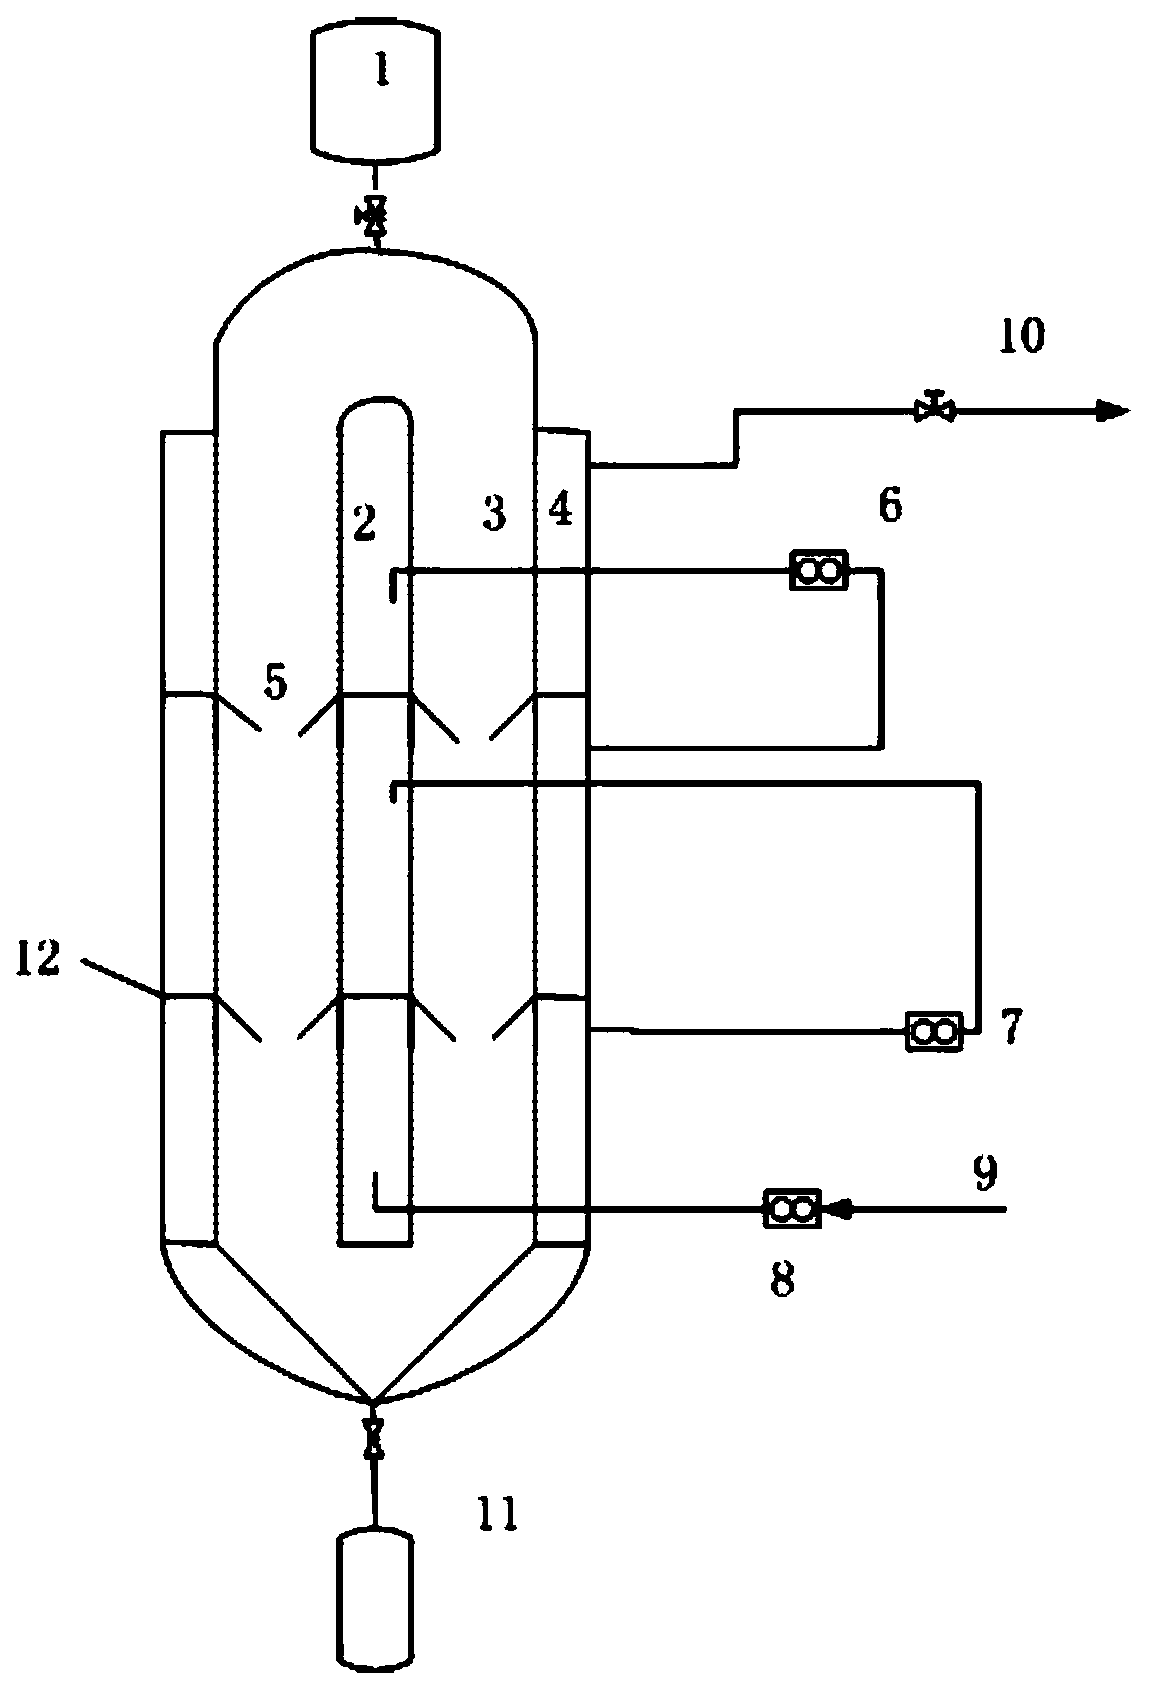 Continuous multi-section radial reactor